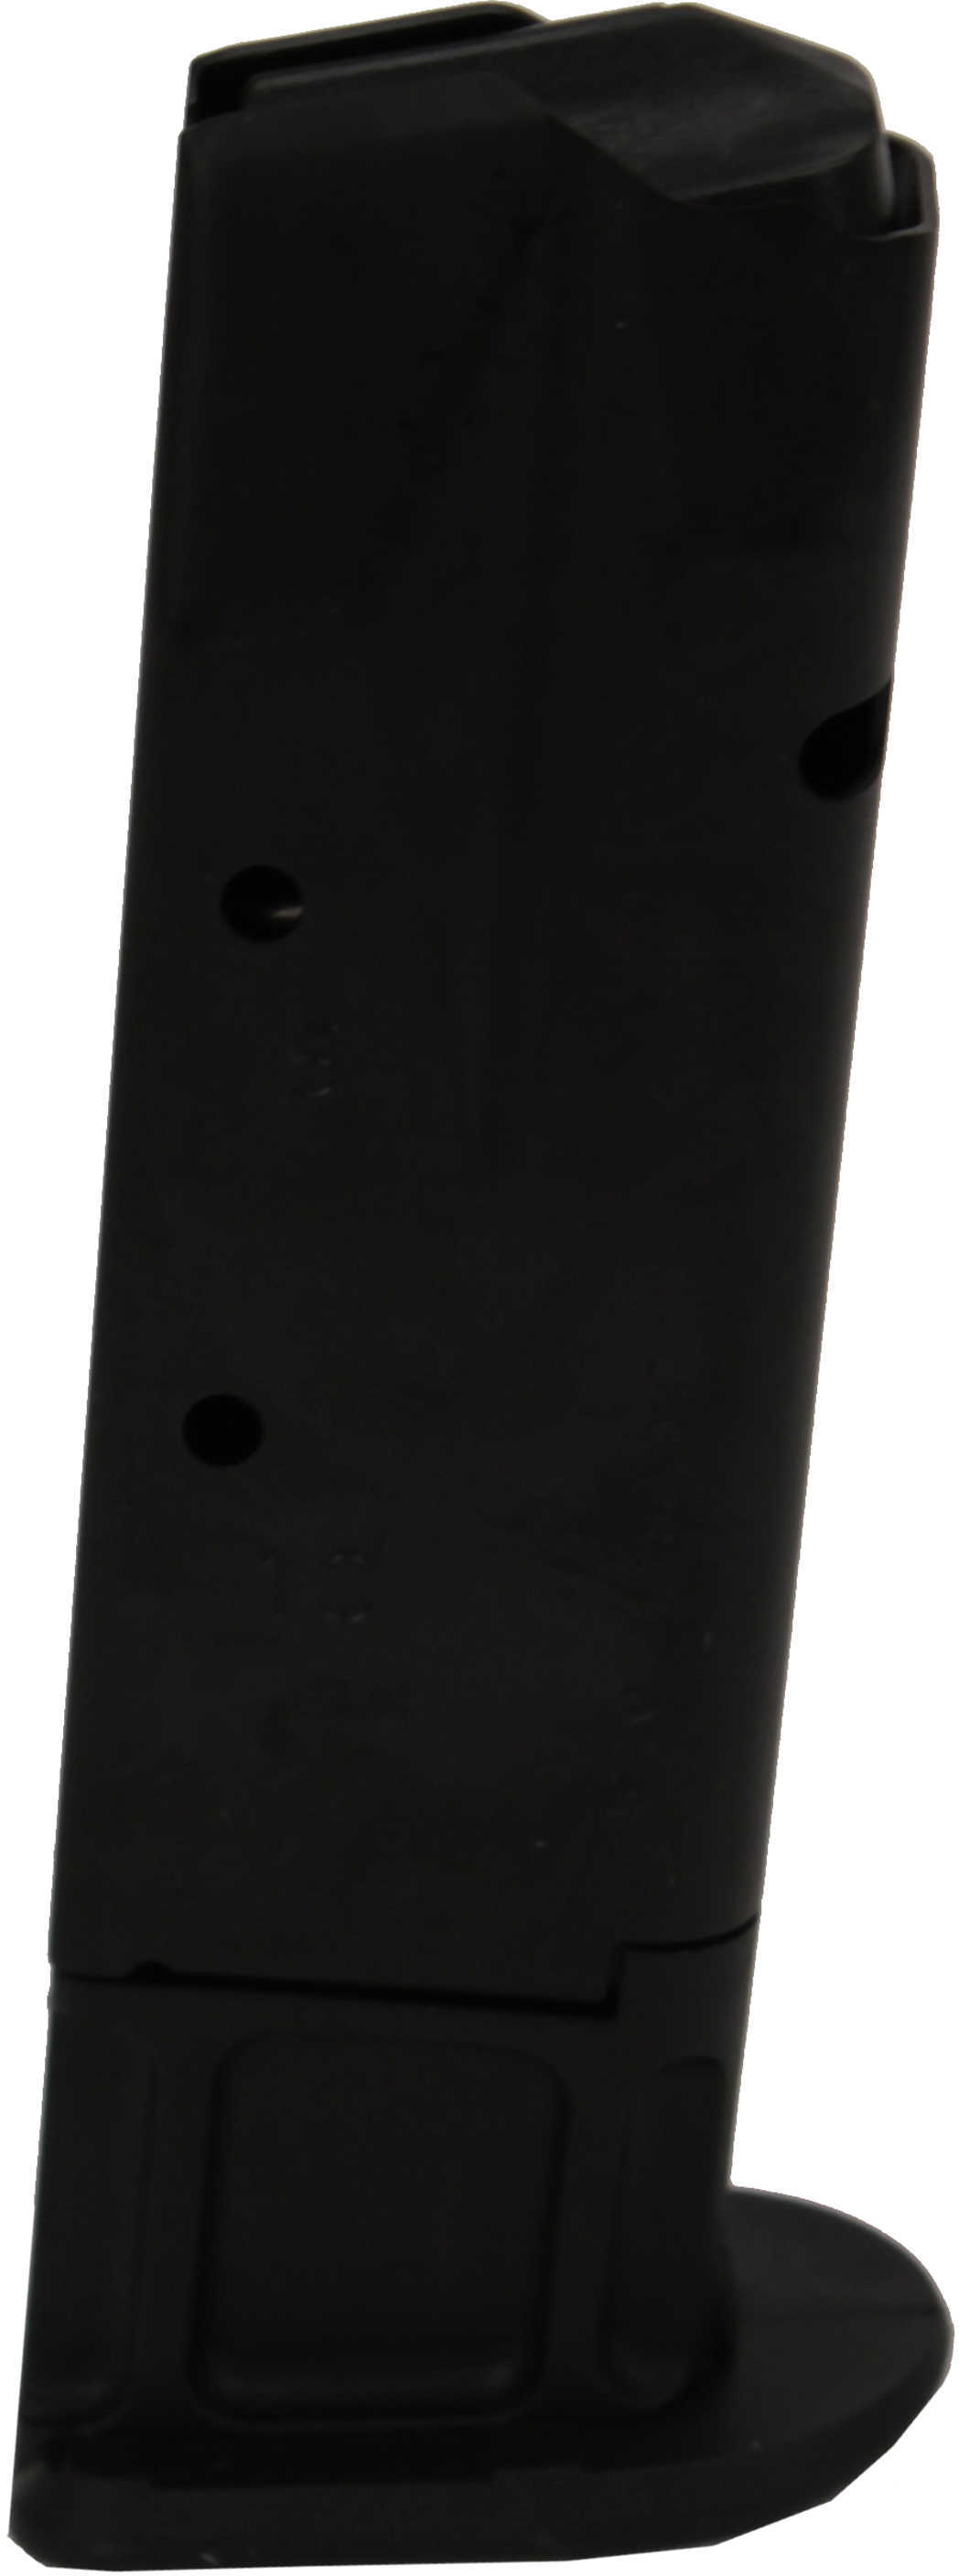 Walther Magazine 9MM 10 Rounds Fits PPQ M1 Anti-Friction Coating 2796406